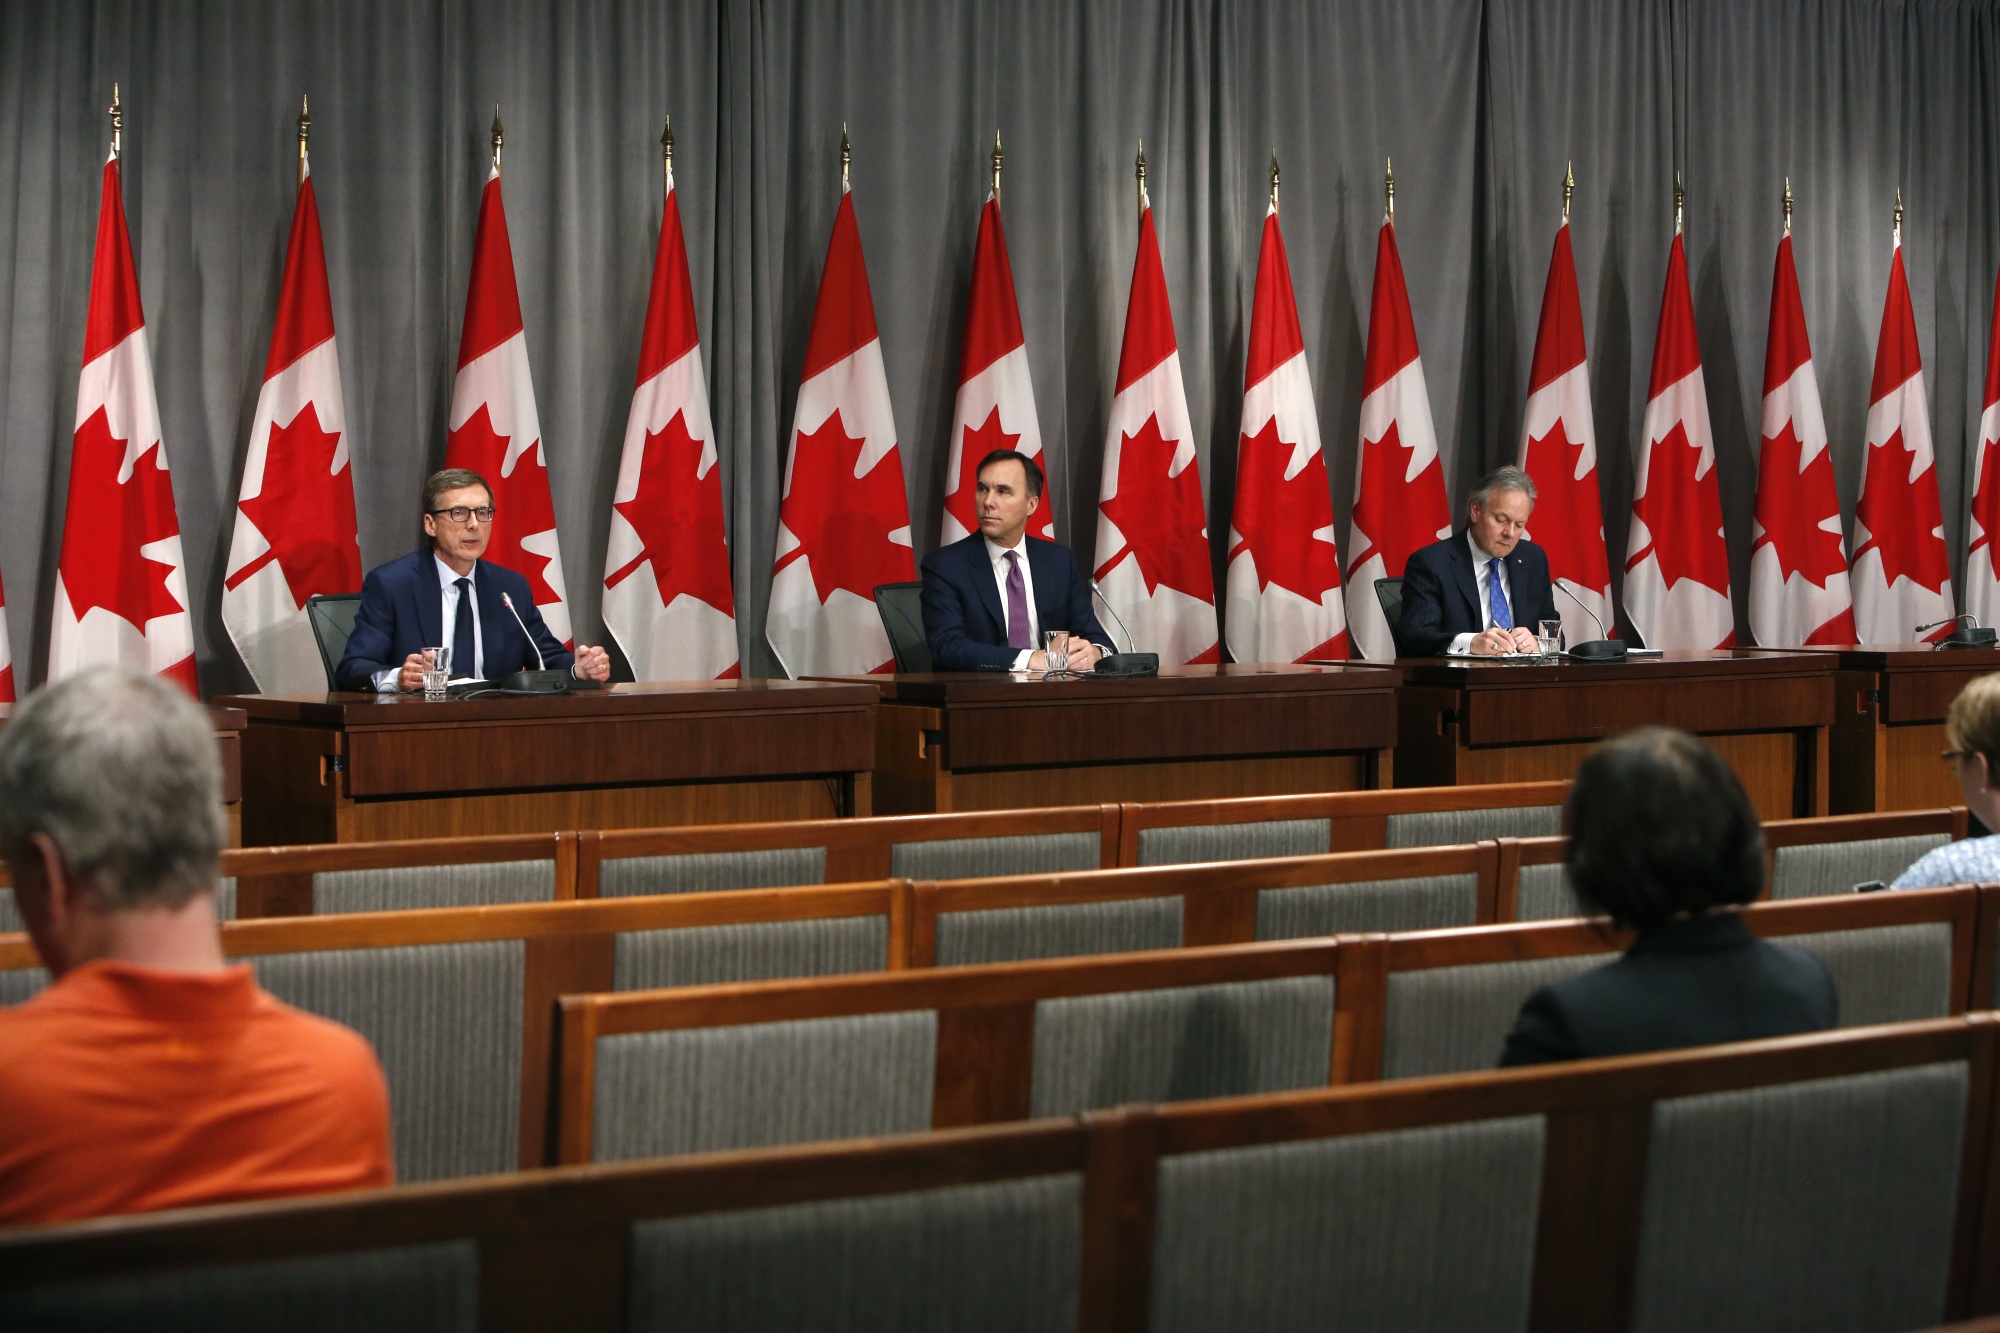 Tiff Macklem, left, speaks at an Ottawa news conference announcing his appointment alongside Bill Morneau and Stephen Poloz on May 1, 2020.